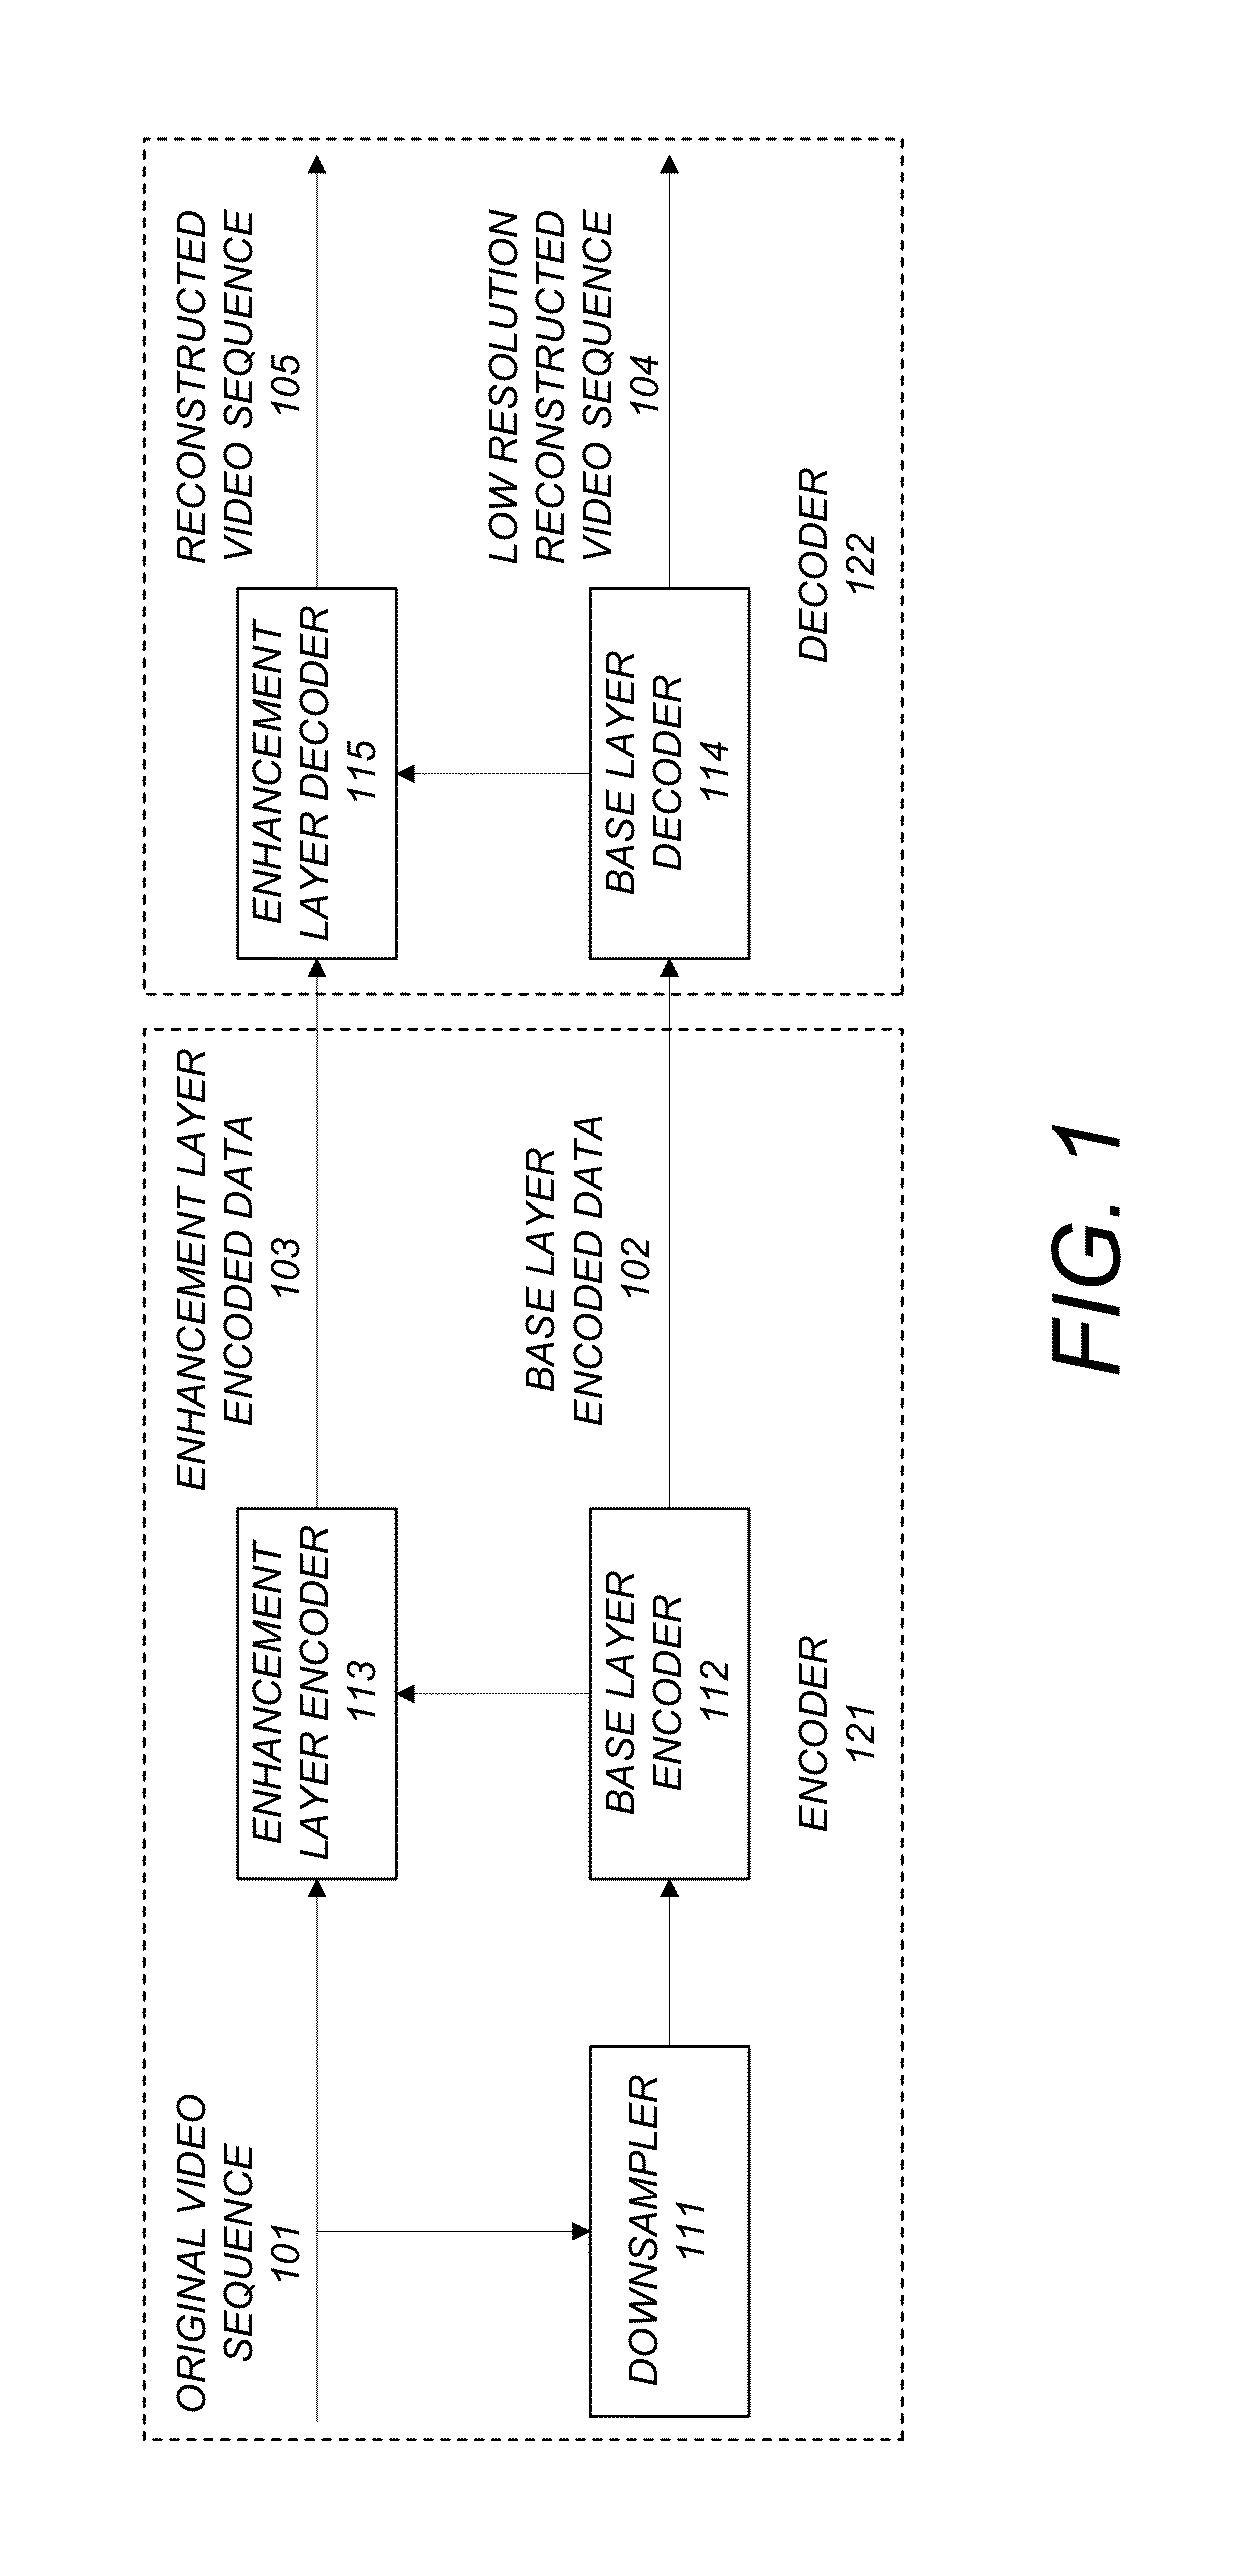 Method and apparatus for spatially scalable video compression and transmission